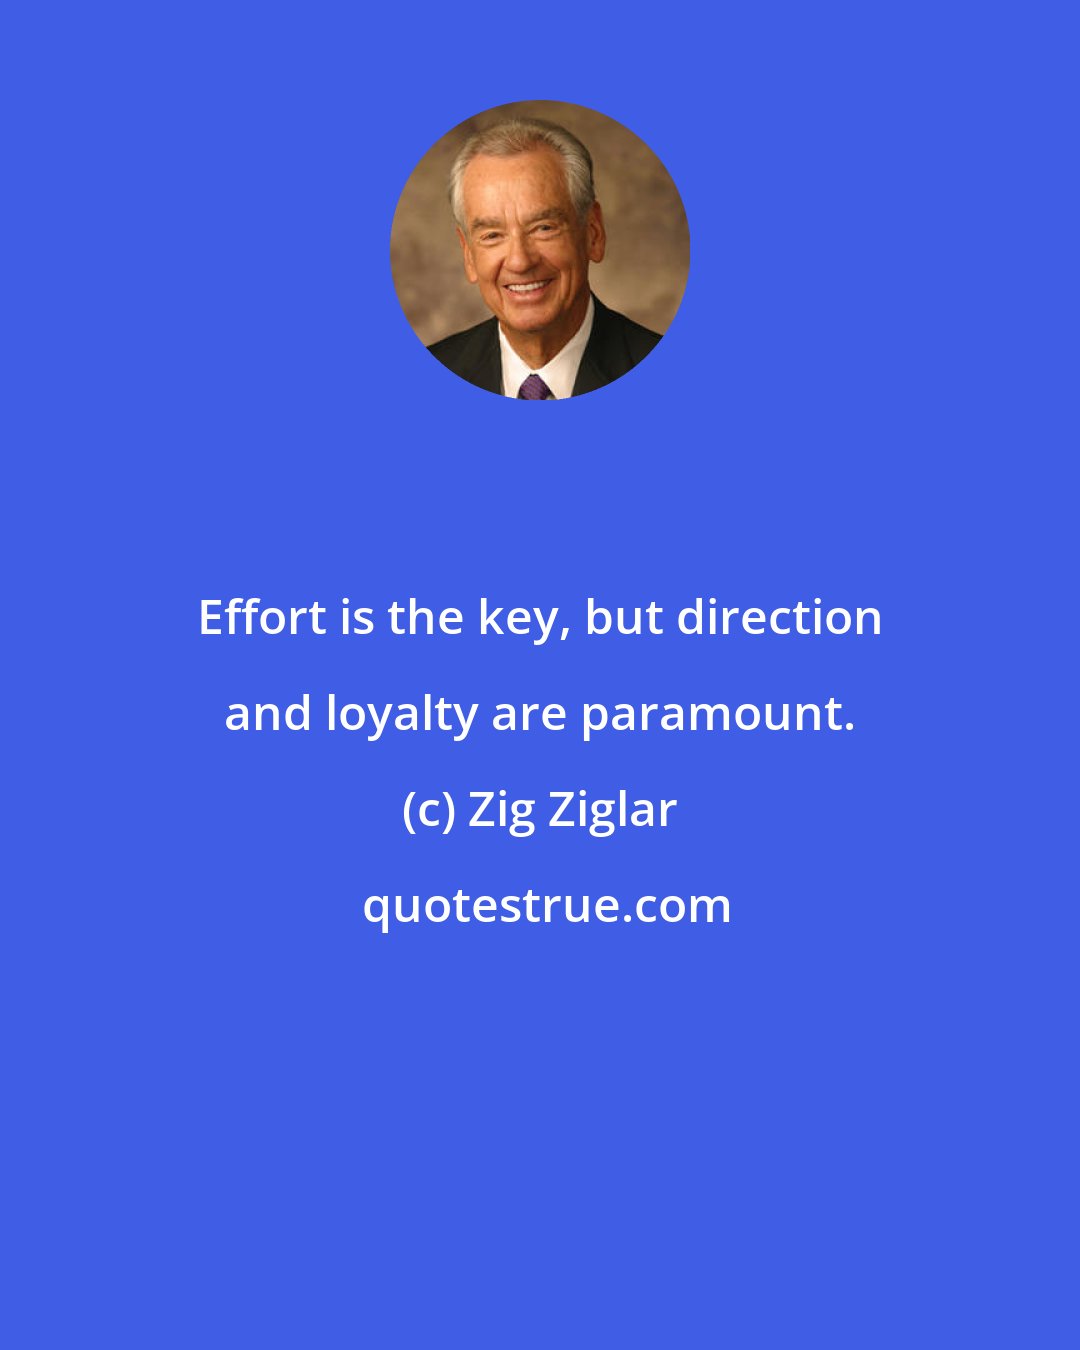 Zig Ziglar: Effort is the key, but direction and loyalty are paramount.